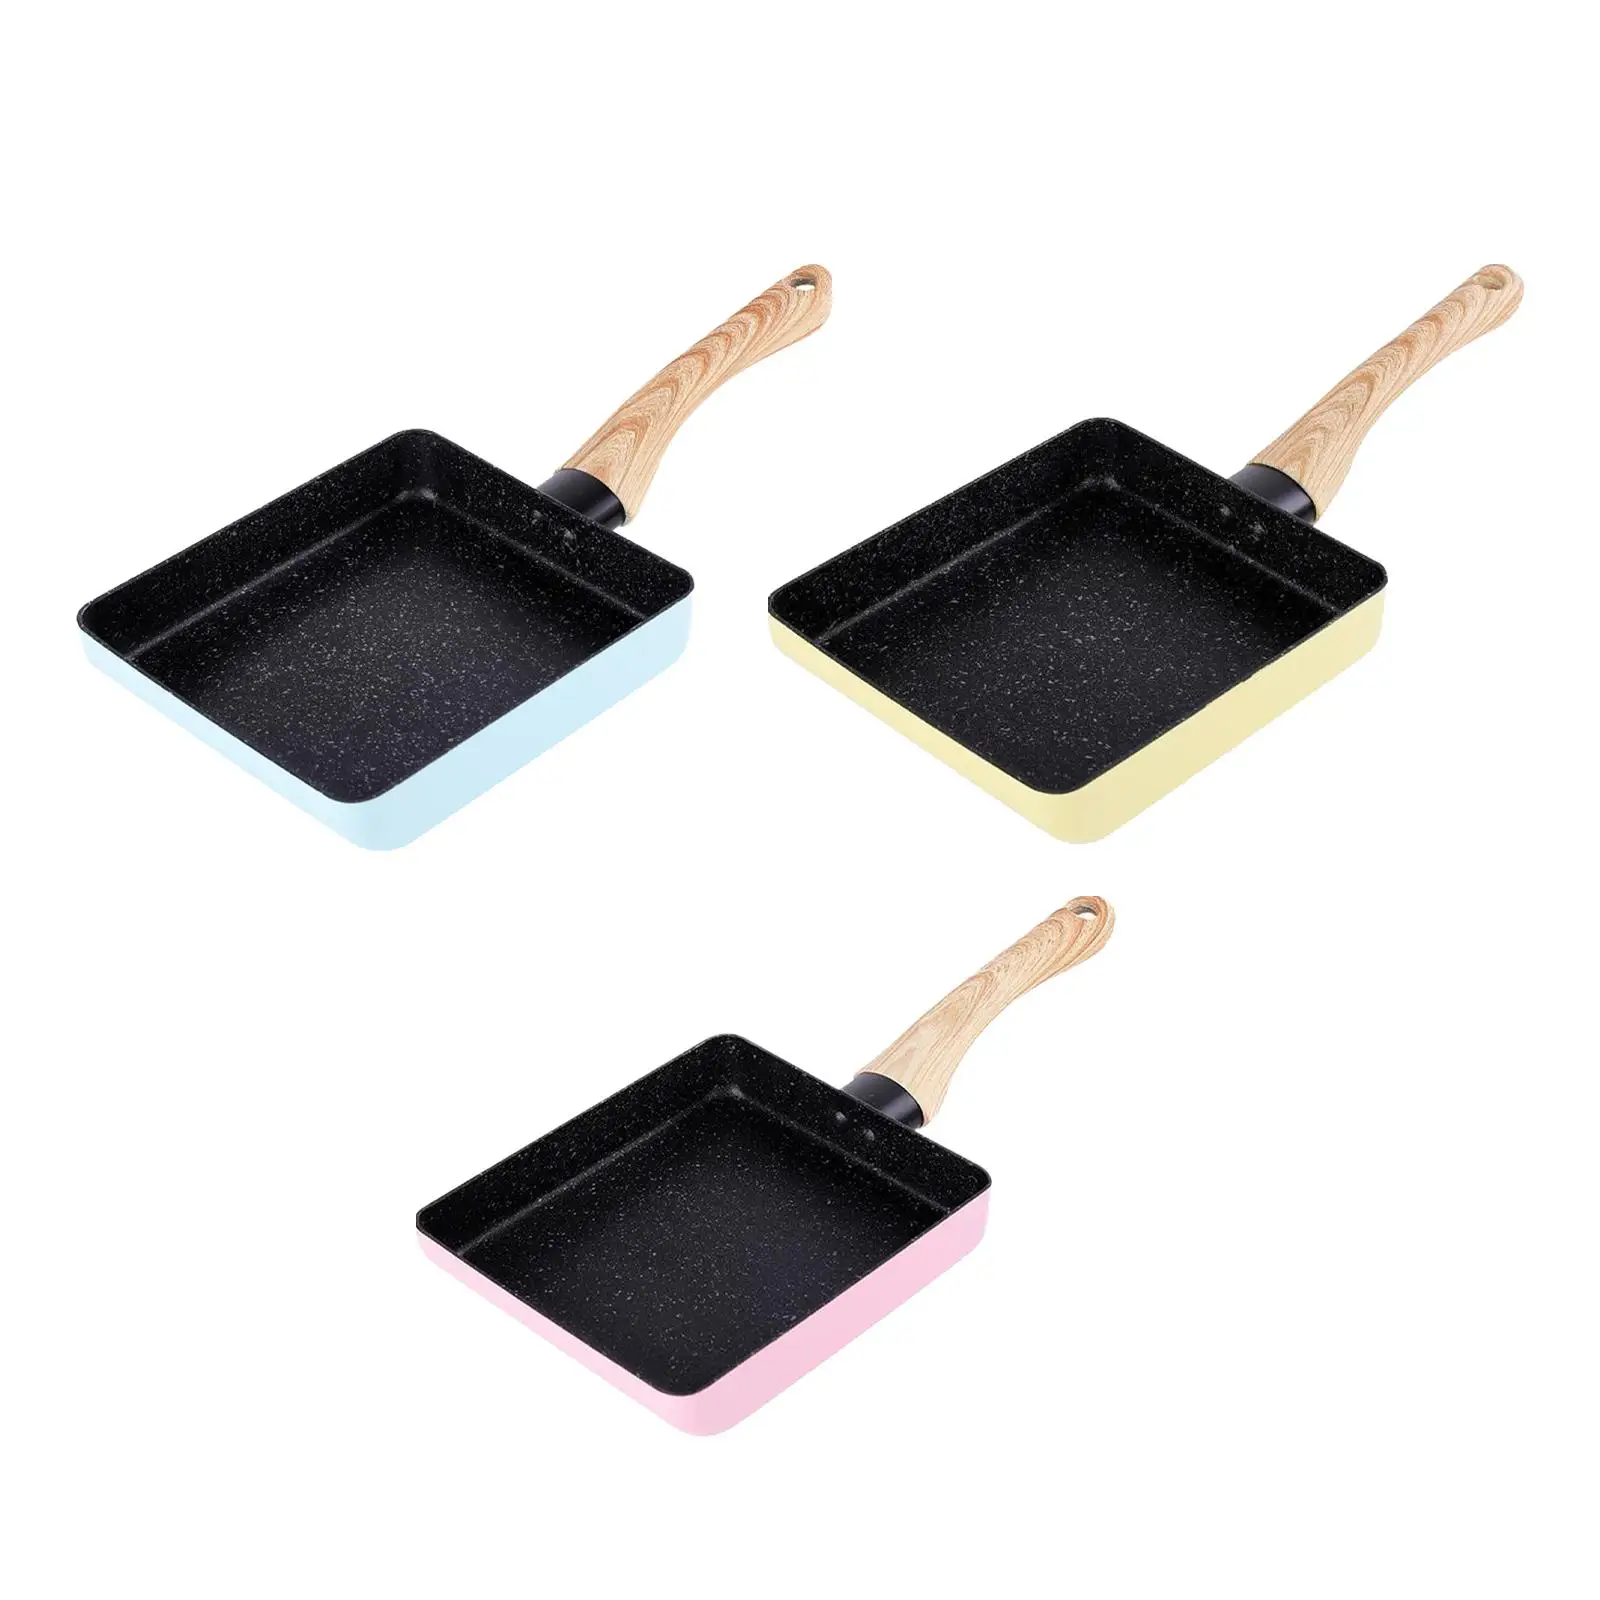 Small Tamagoyaki Frying Pan Rectangle 5x7 inch Japanese Omelette Pan for Fried Breadfish Crab Cake Toast Kitchen Dining Cookware